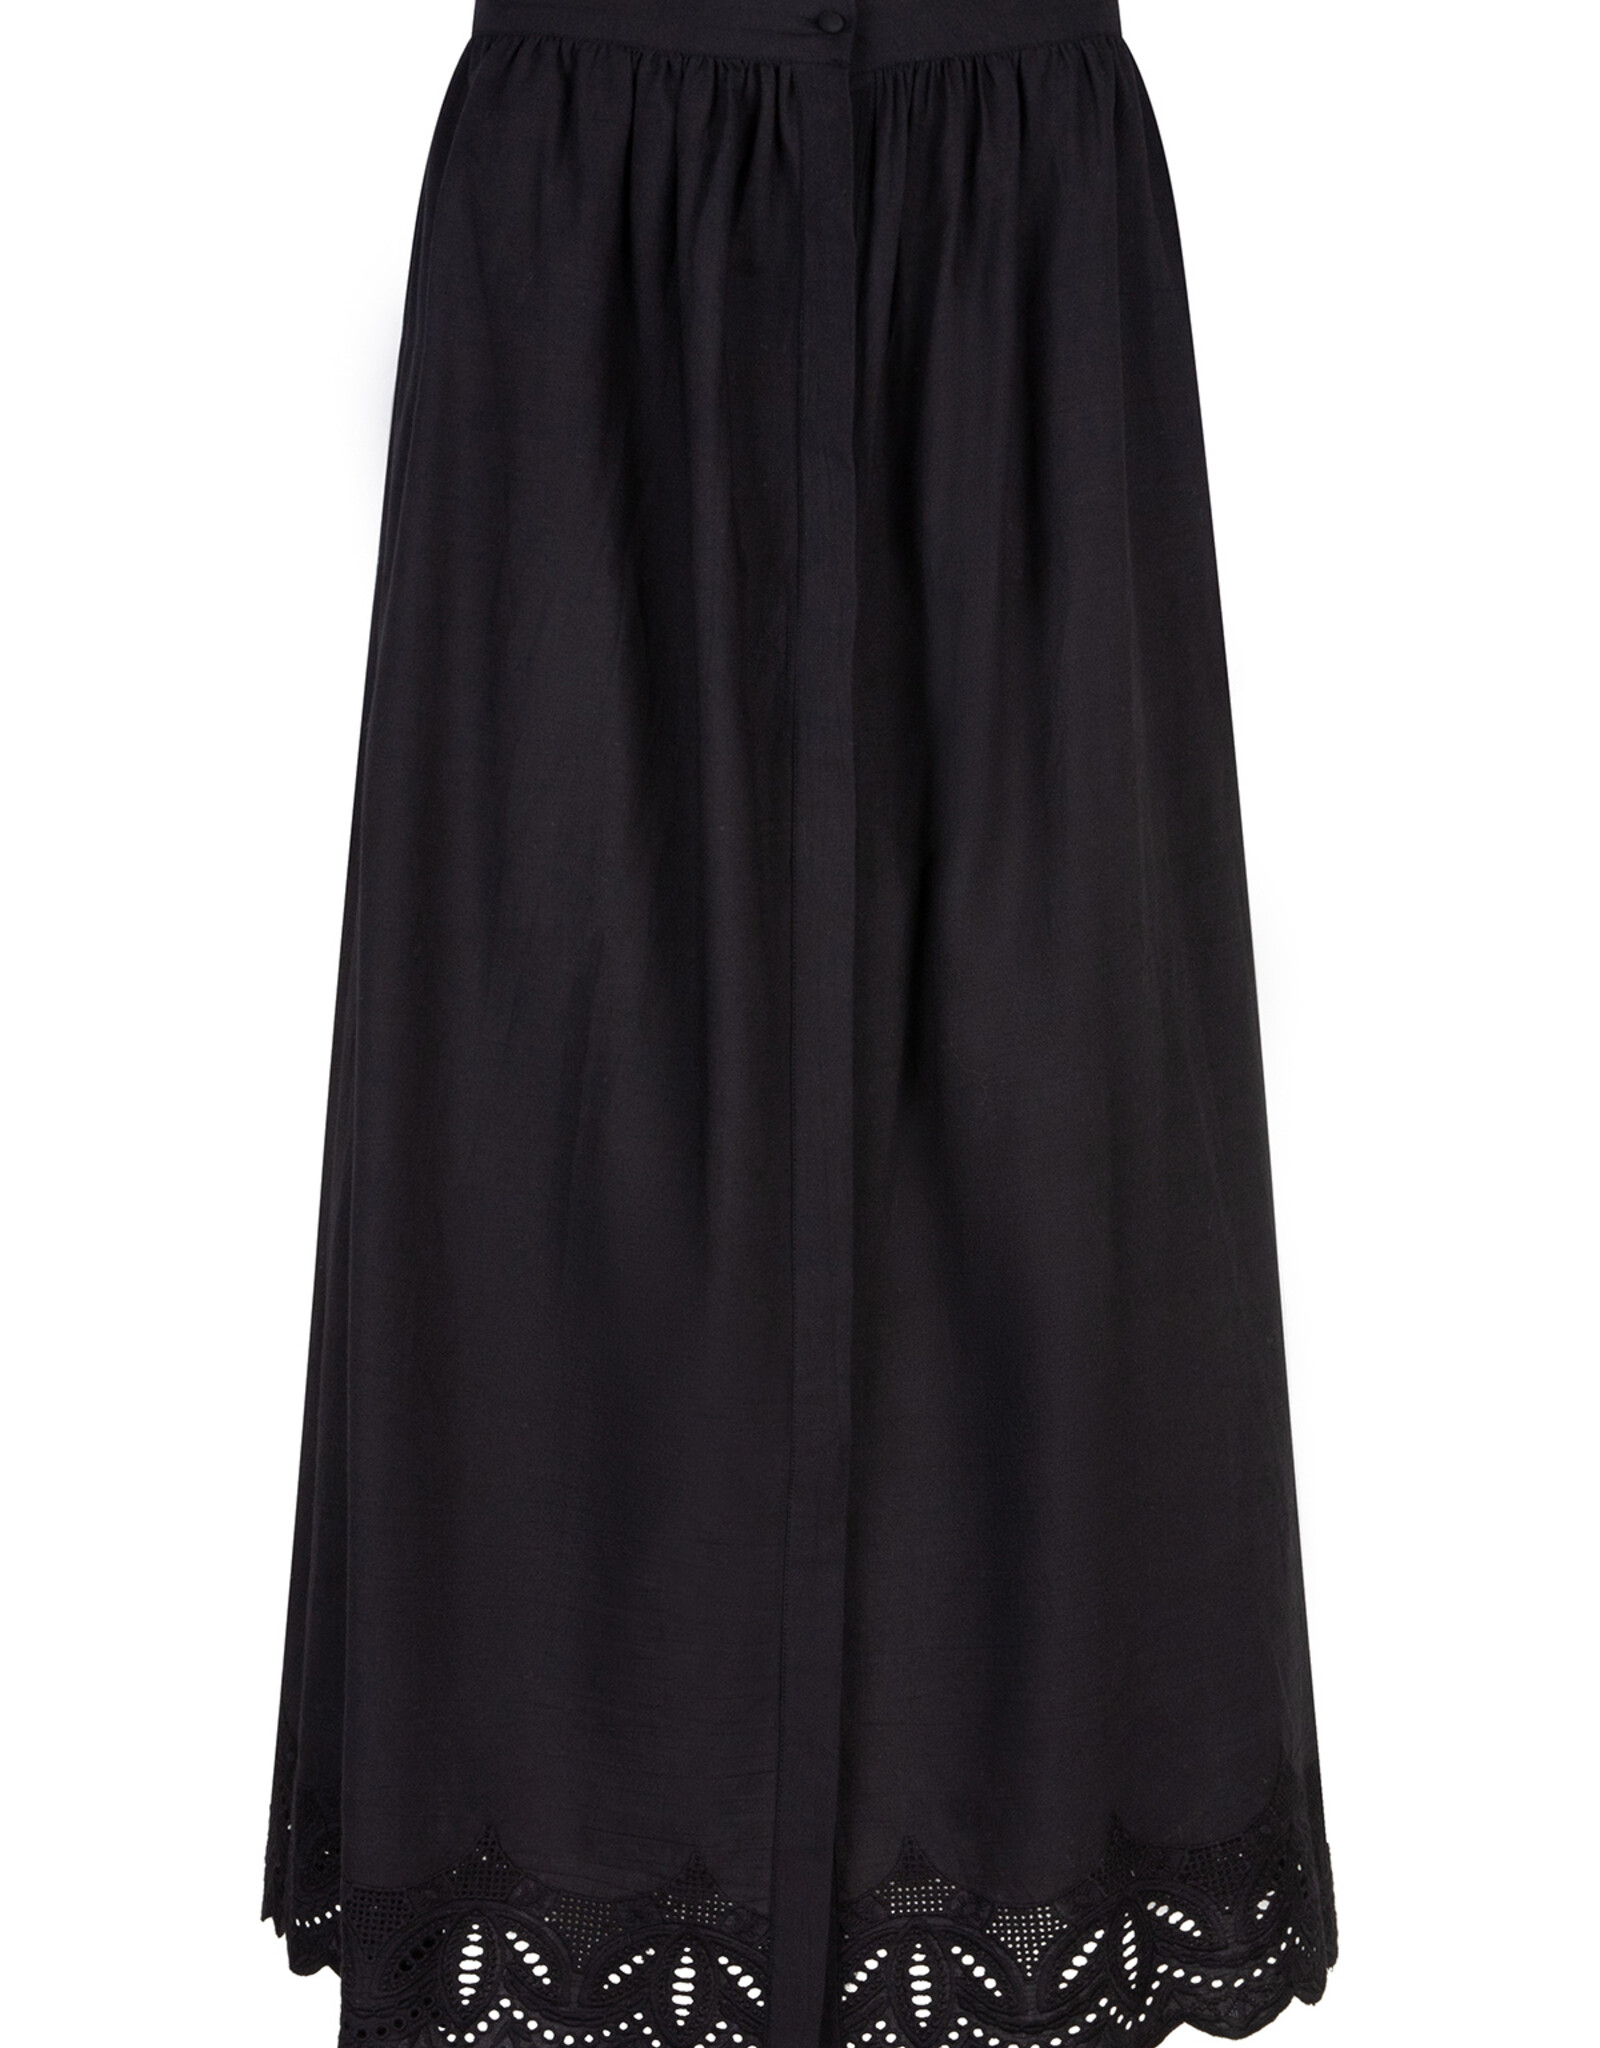 Ruby Tuesday SABIA long skirt with embro details at hem ANTHRACITE